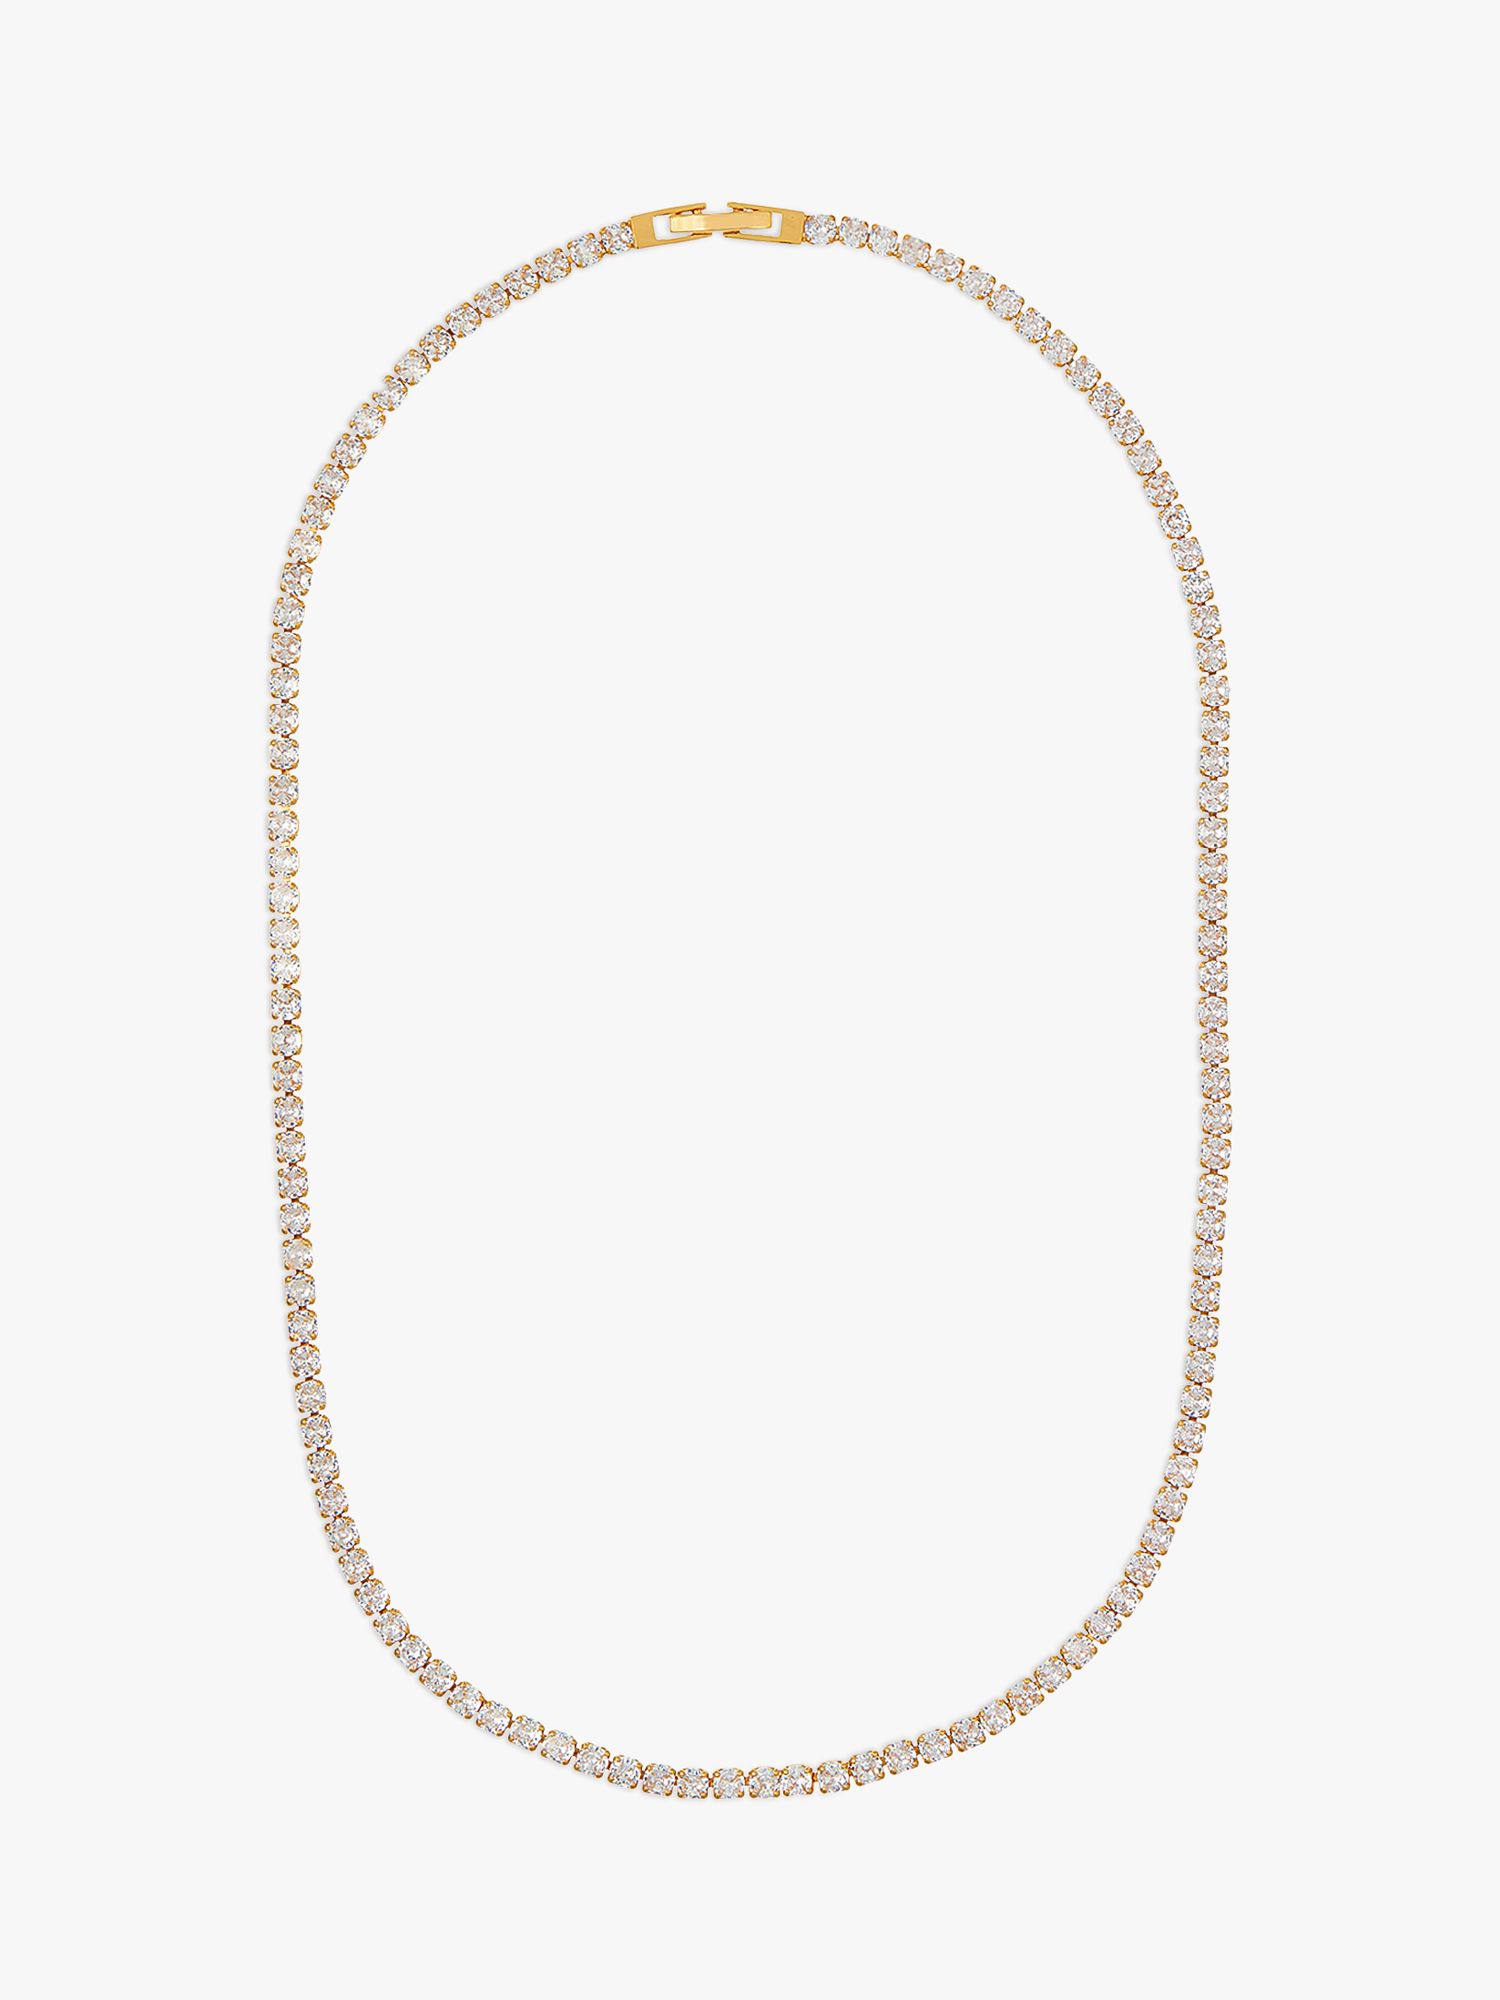 Buy Orelia Cupchain Tennis Necklace, Gold Online at johnlewis.com